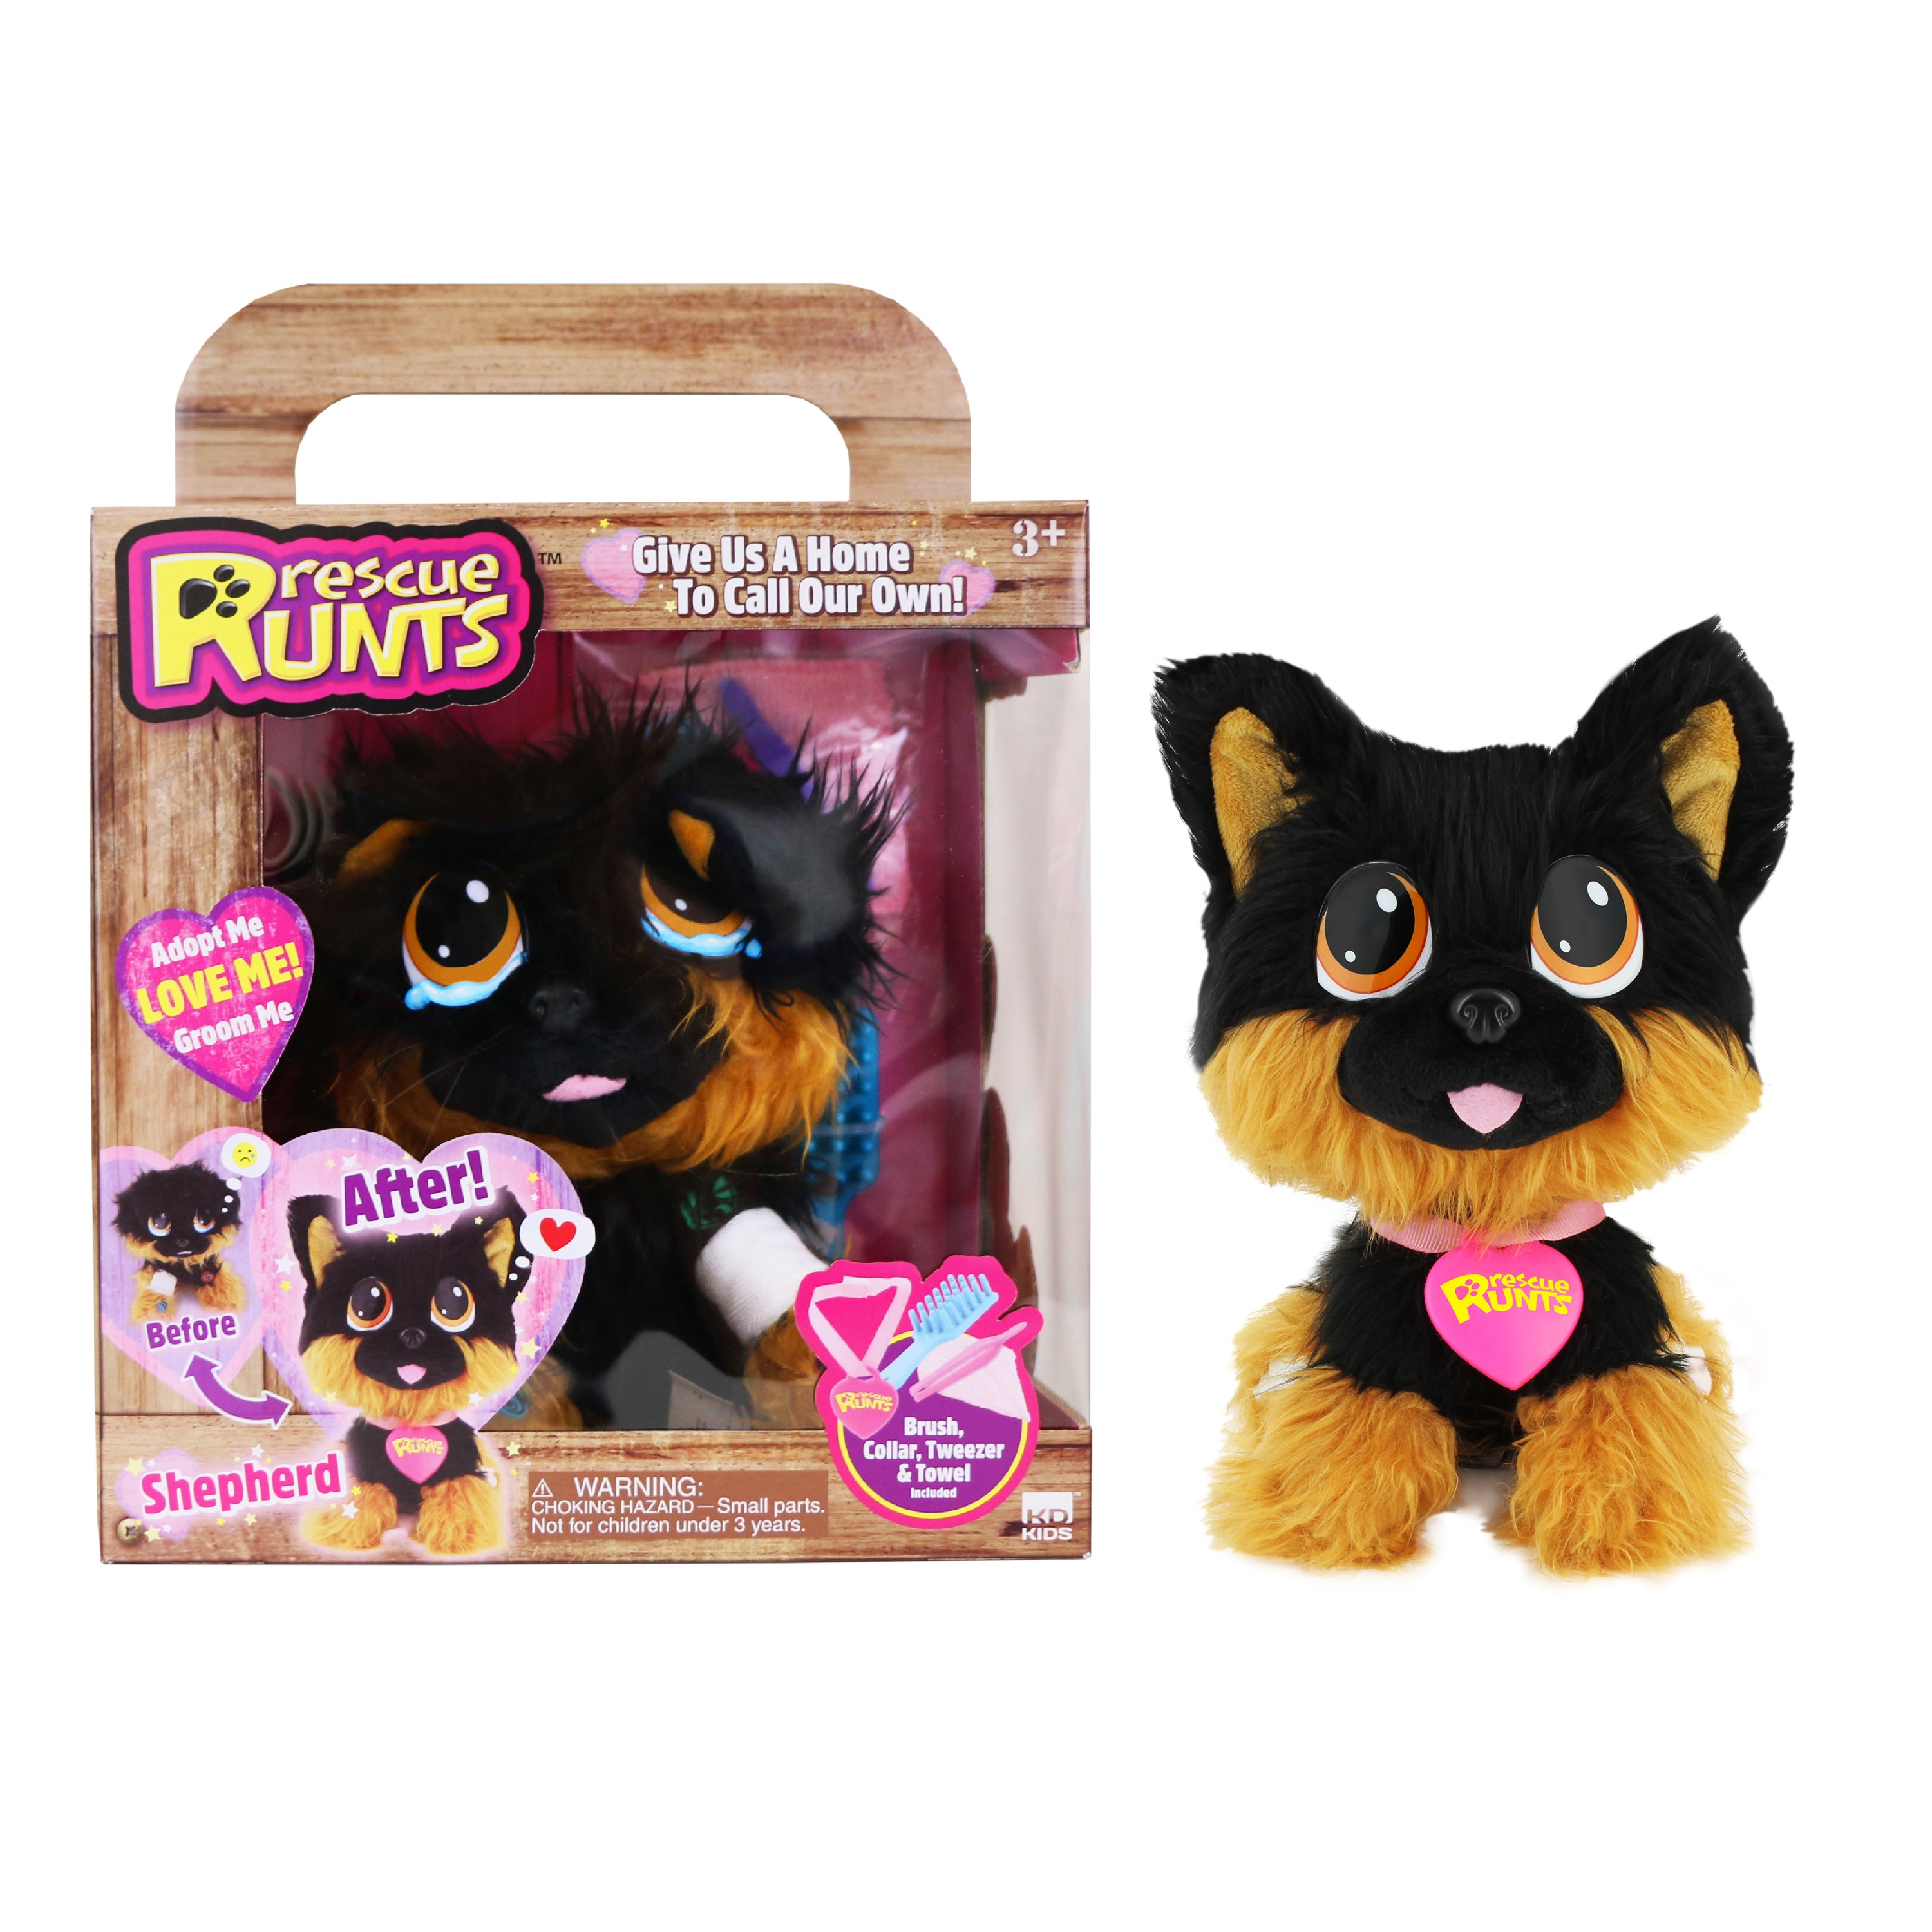 Rescue runts shepherd rescue dog plush by kd kids - image 1 of 8